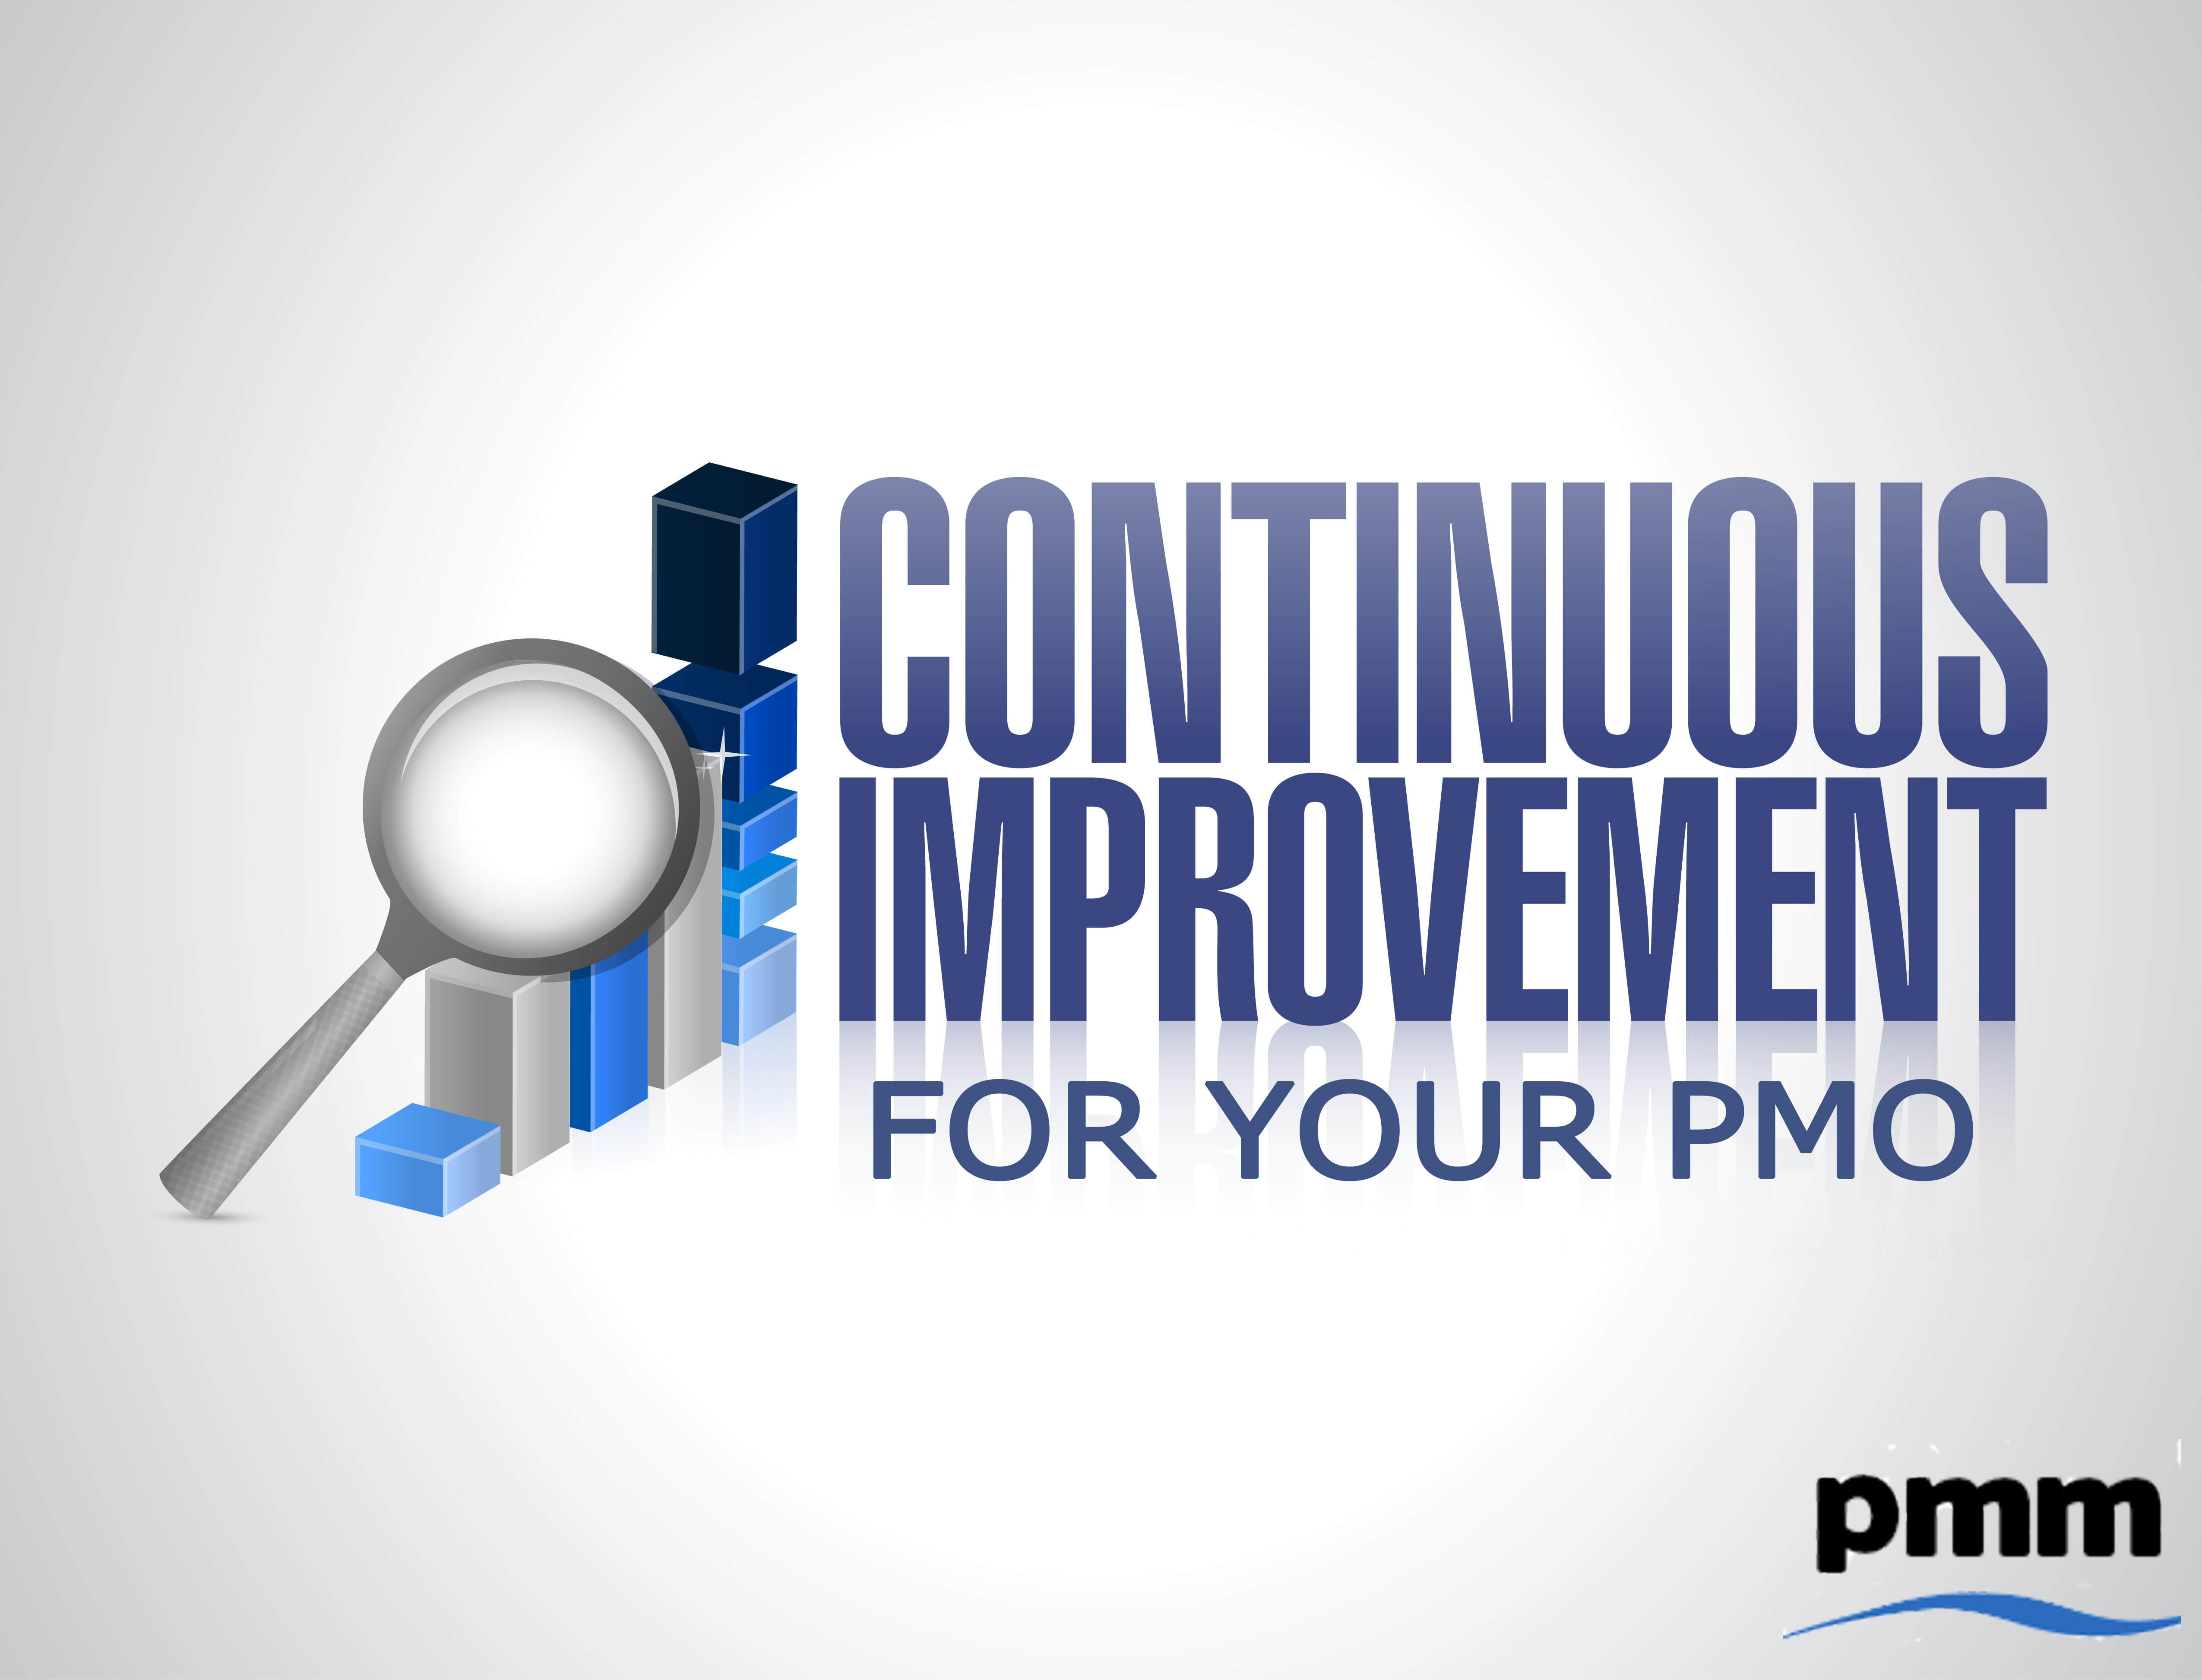 Does your PMO practice continuous improvement?